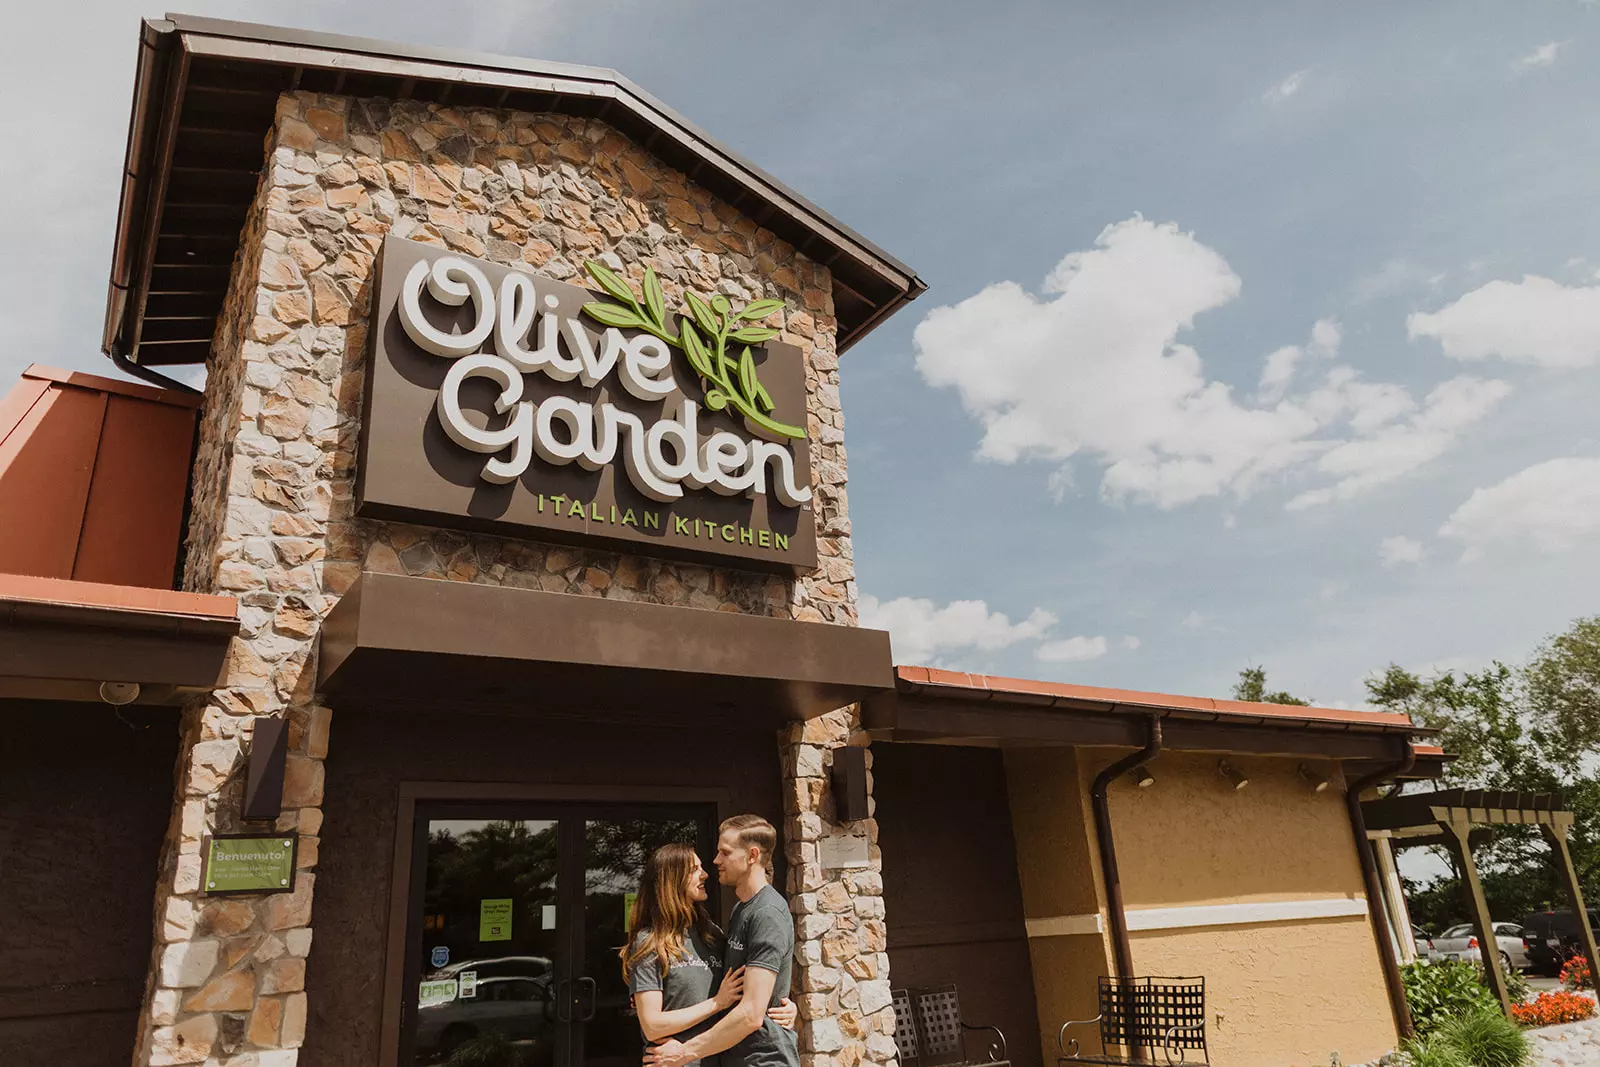 This Michigan Couple Had An Olive Garden Themed Wedding